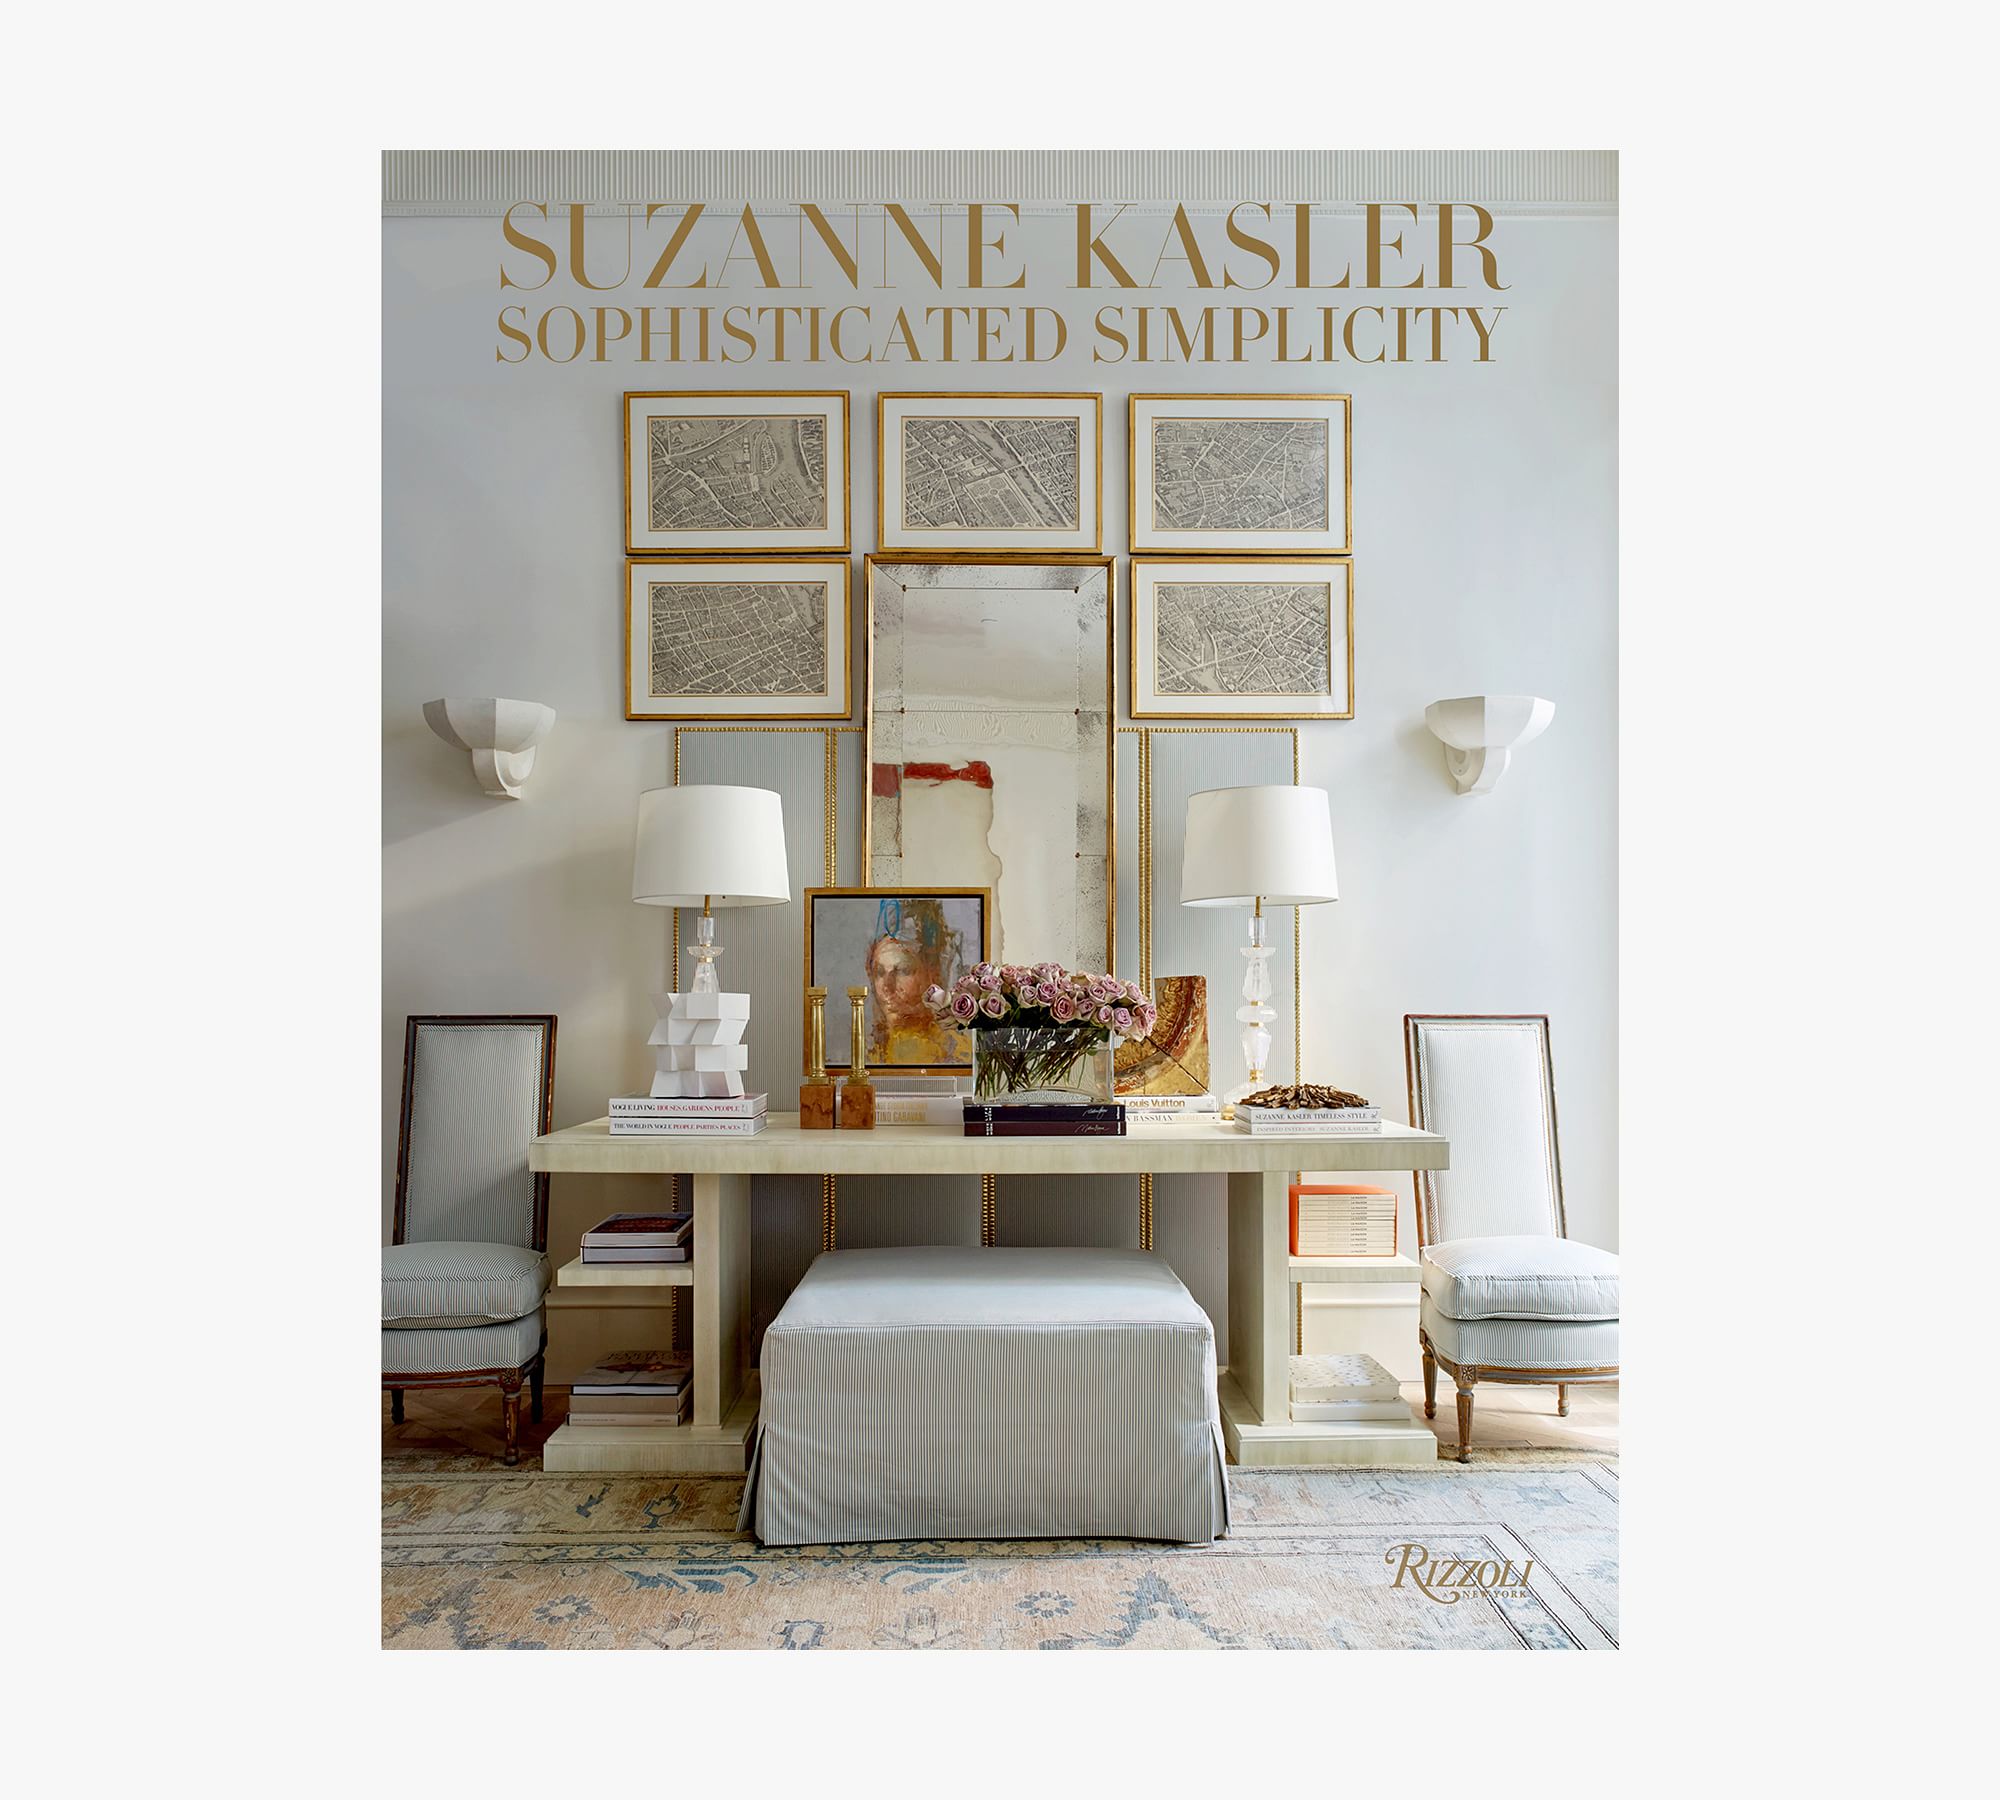 Suzanne Kasler: Sophisticated Simplicity